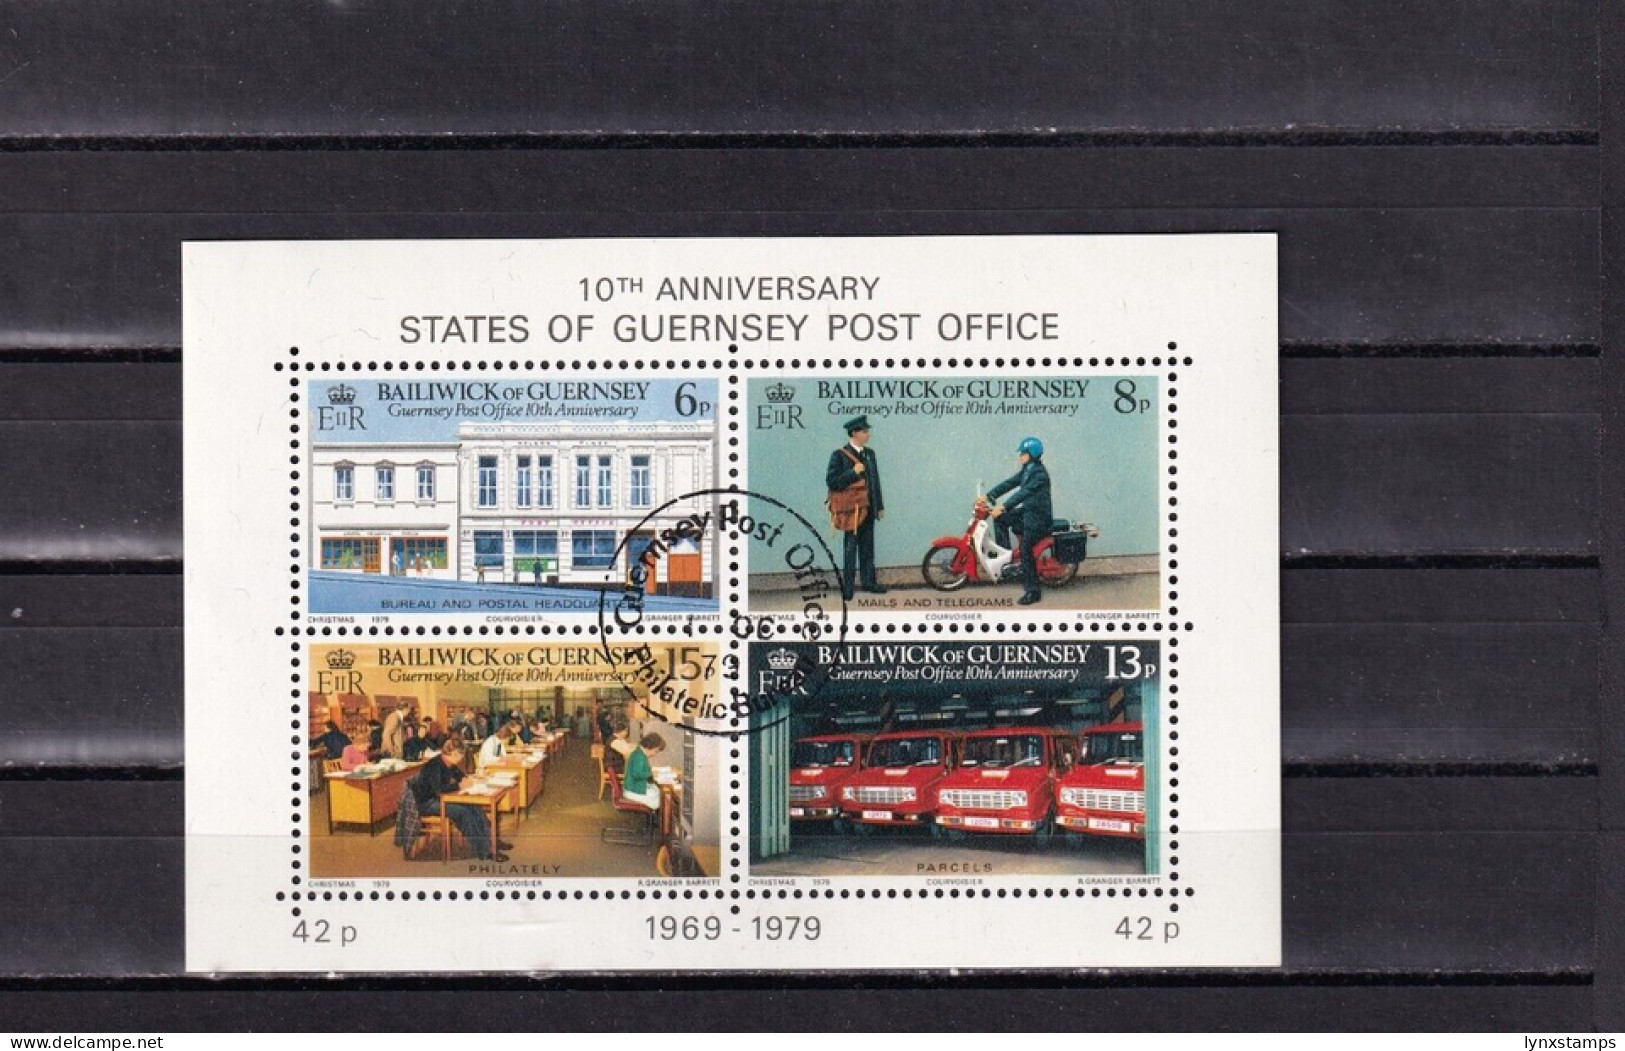 SA03 Guernsey Great Britain 1979 10th Anniv Guernsey Post Office Block Used - Ortsausgaben